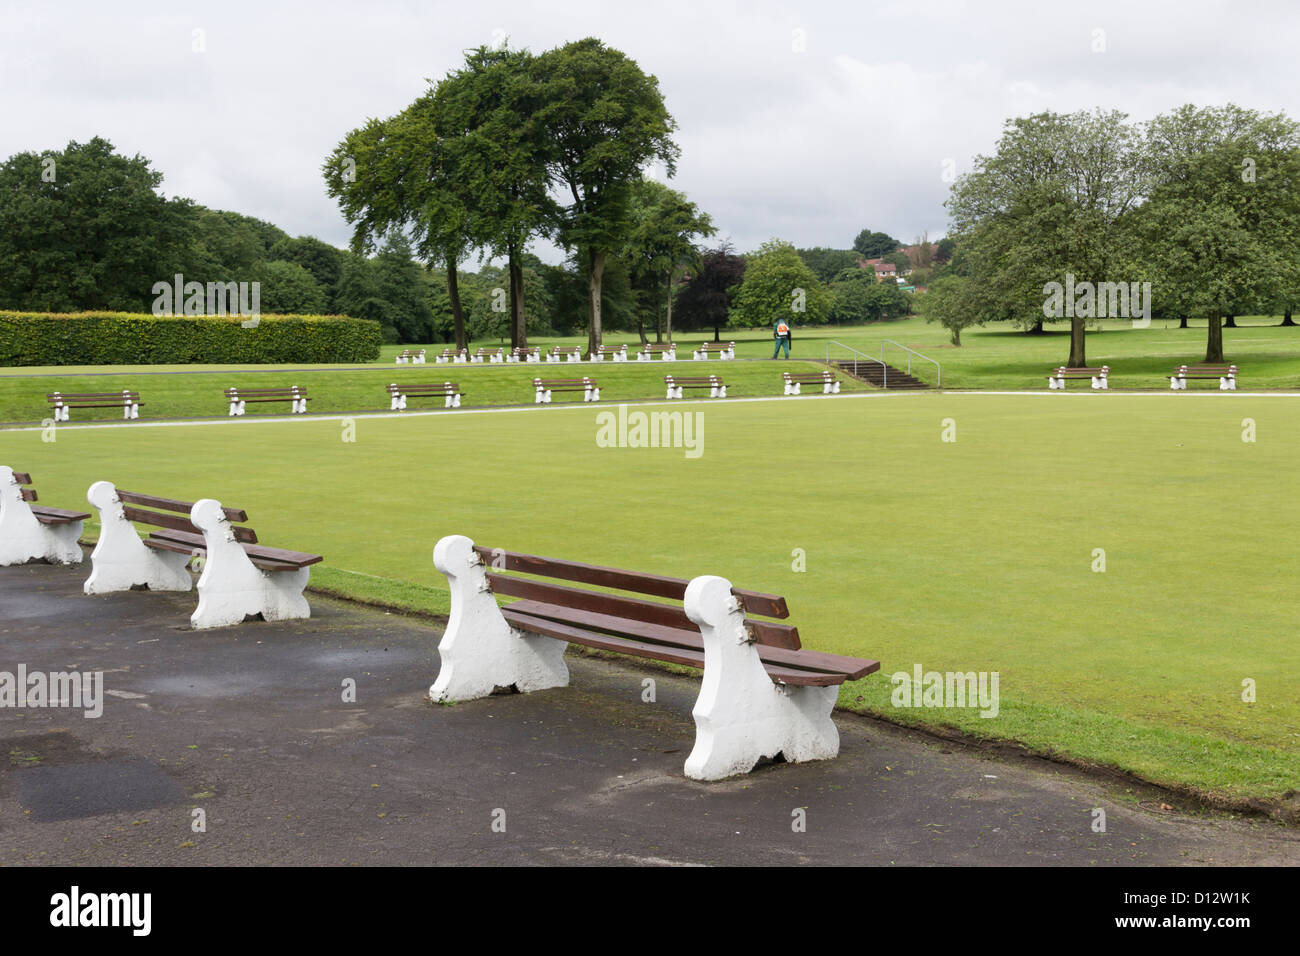 Crown bowling green surrounded by bench seats at Moss Bank Park Bolton. Nobody playing. Stock Photo